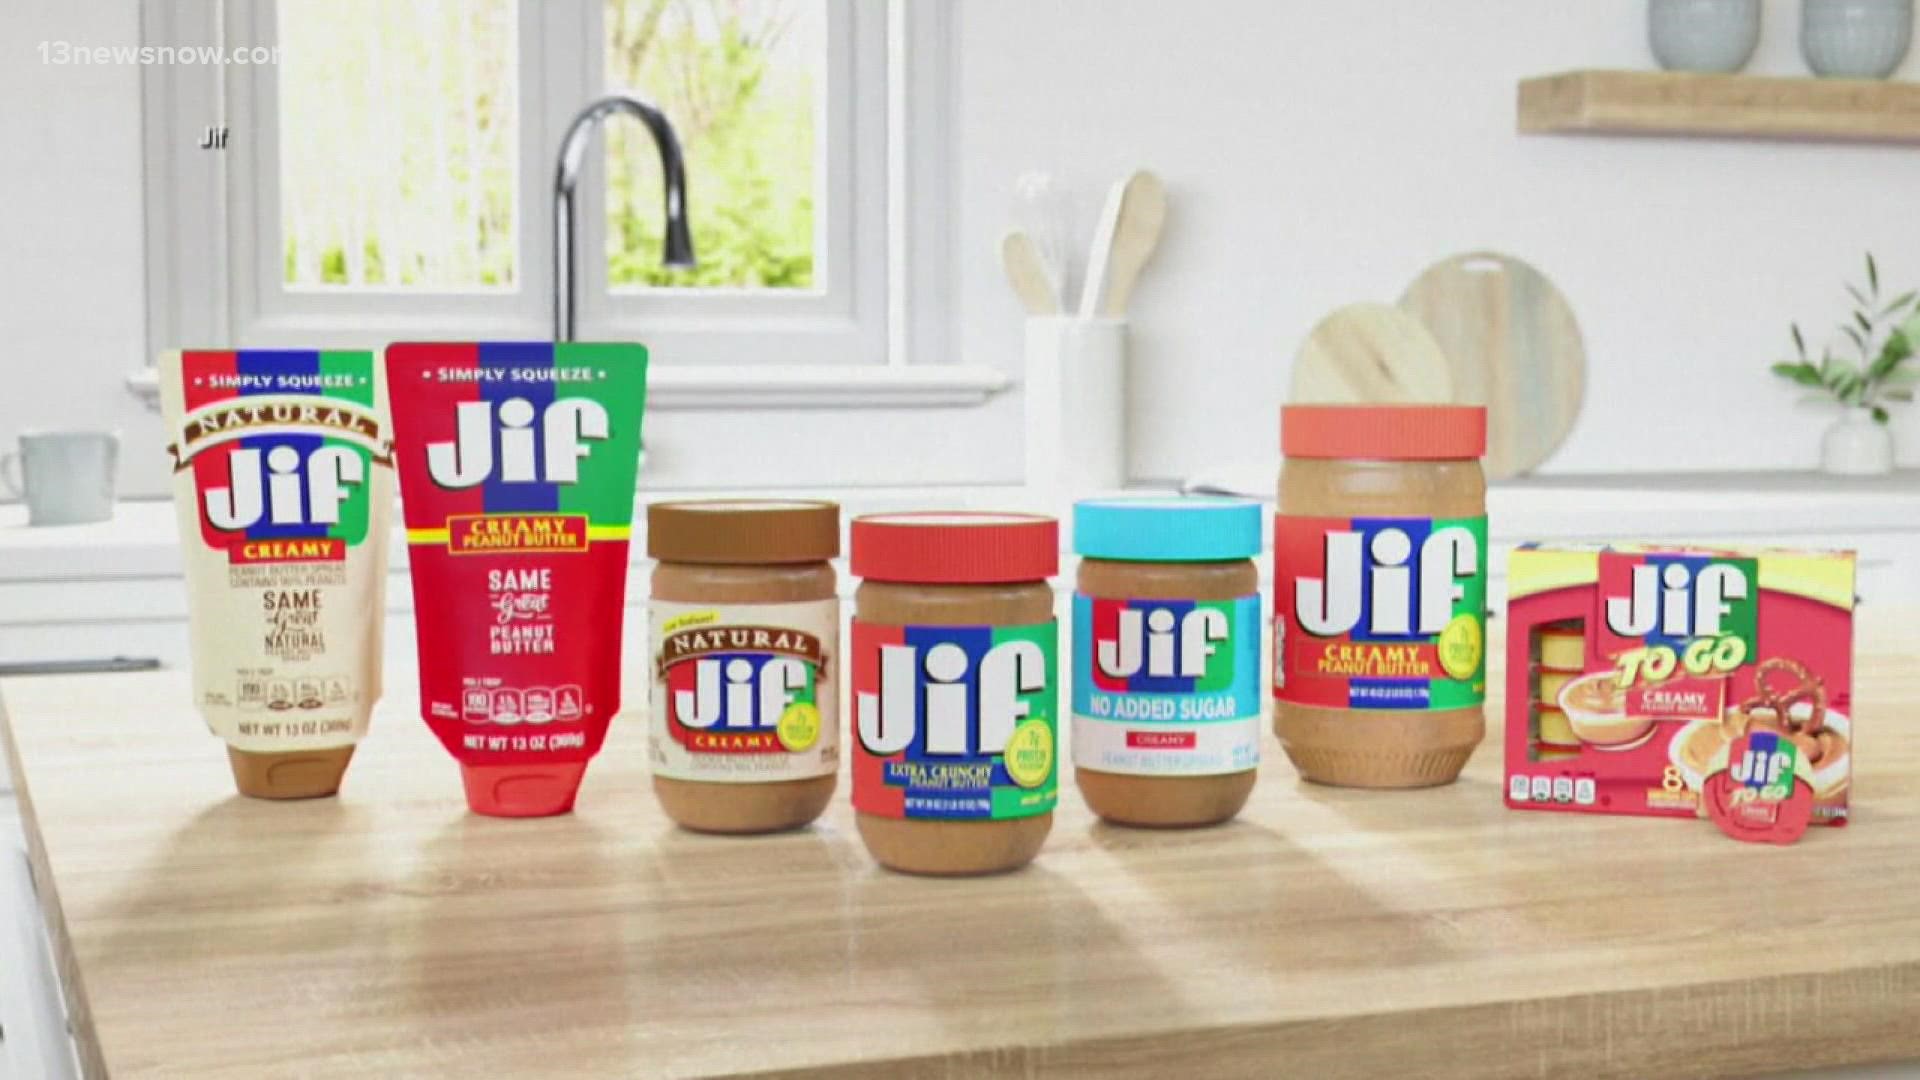 The peanut butter has been linked to a multistate outbreak of salmonella.